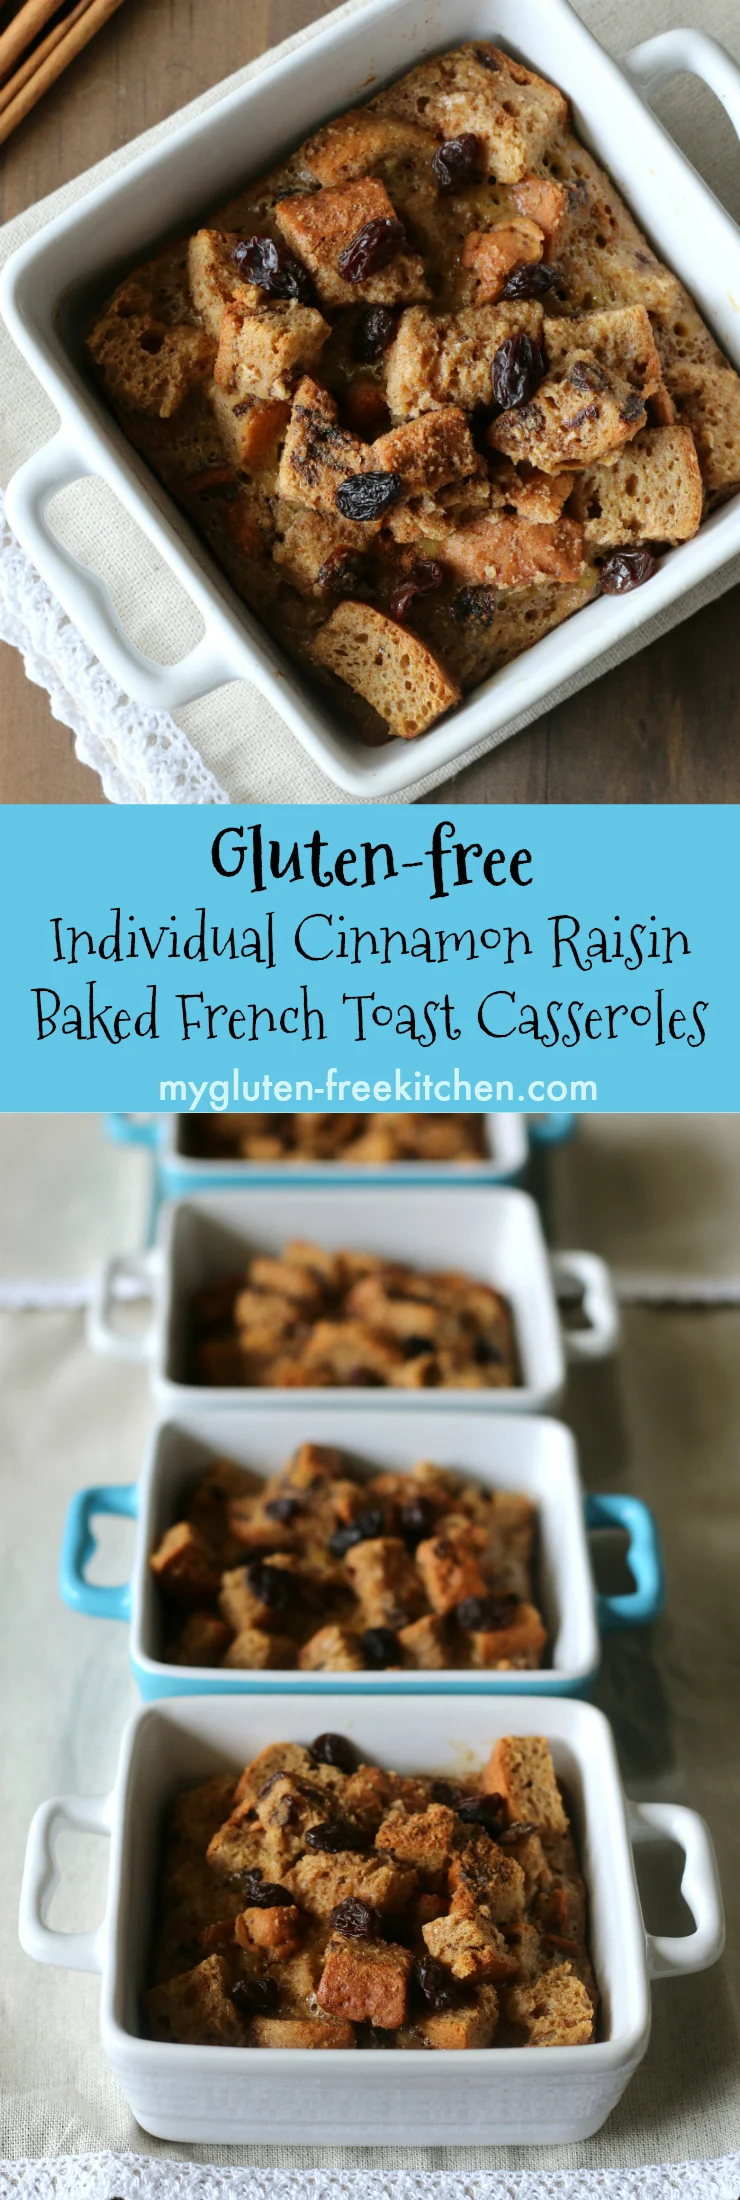 Gluten-free Individual Cinnamon Raisin Baked French Toast Casseroles. Perfect recipe for those special occasion brunches. Yummy gluten-free breakfast casserole.